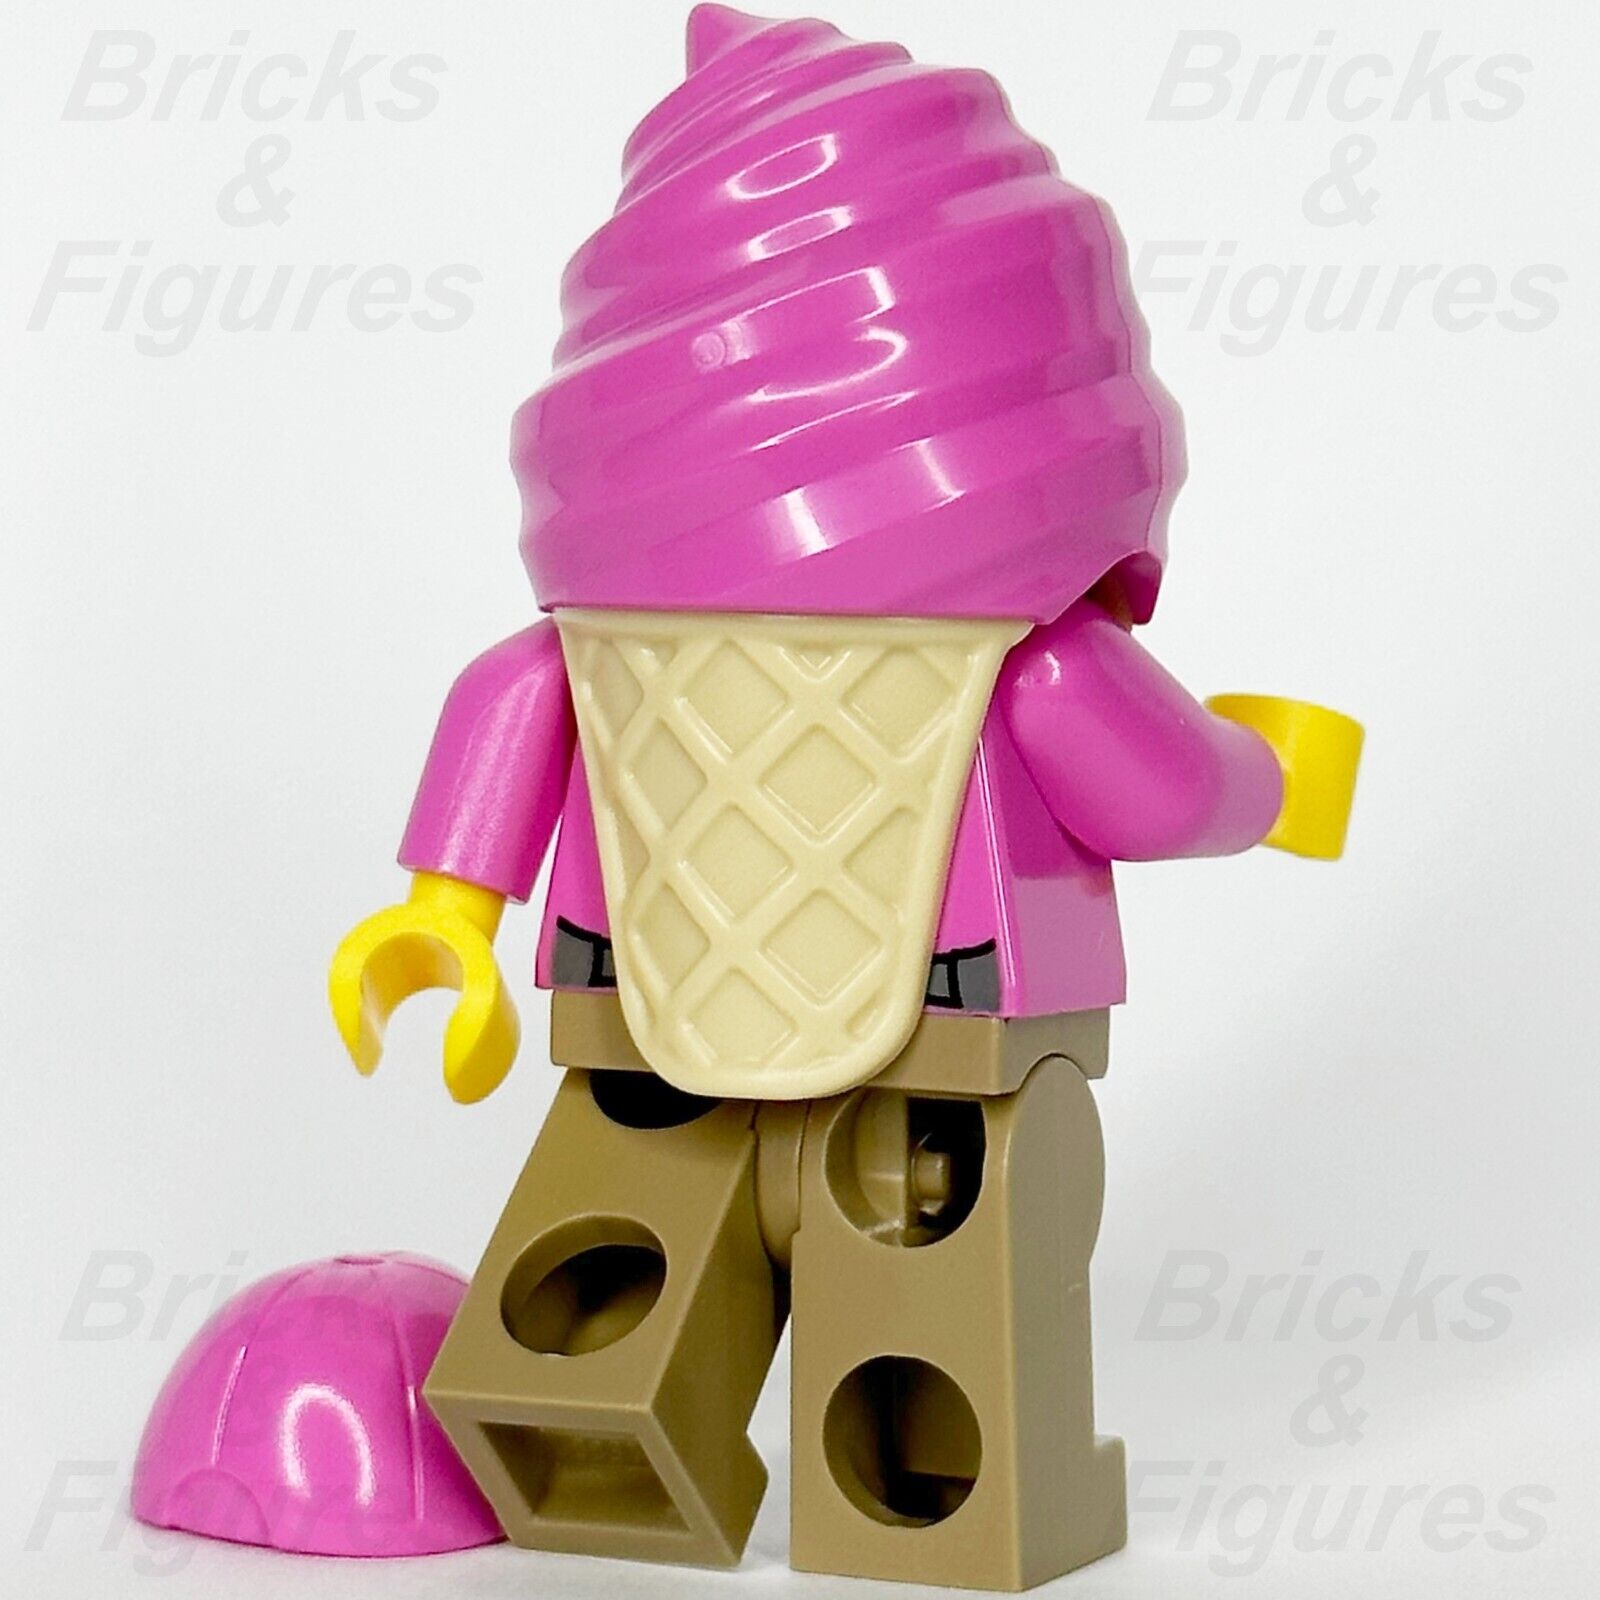 LEGO City Police Crook Cream Minifigure w/ Pink Ice Cream Outfit 60314 cty1385 4